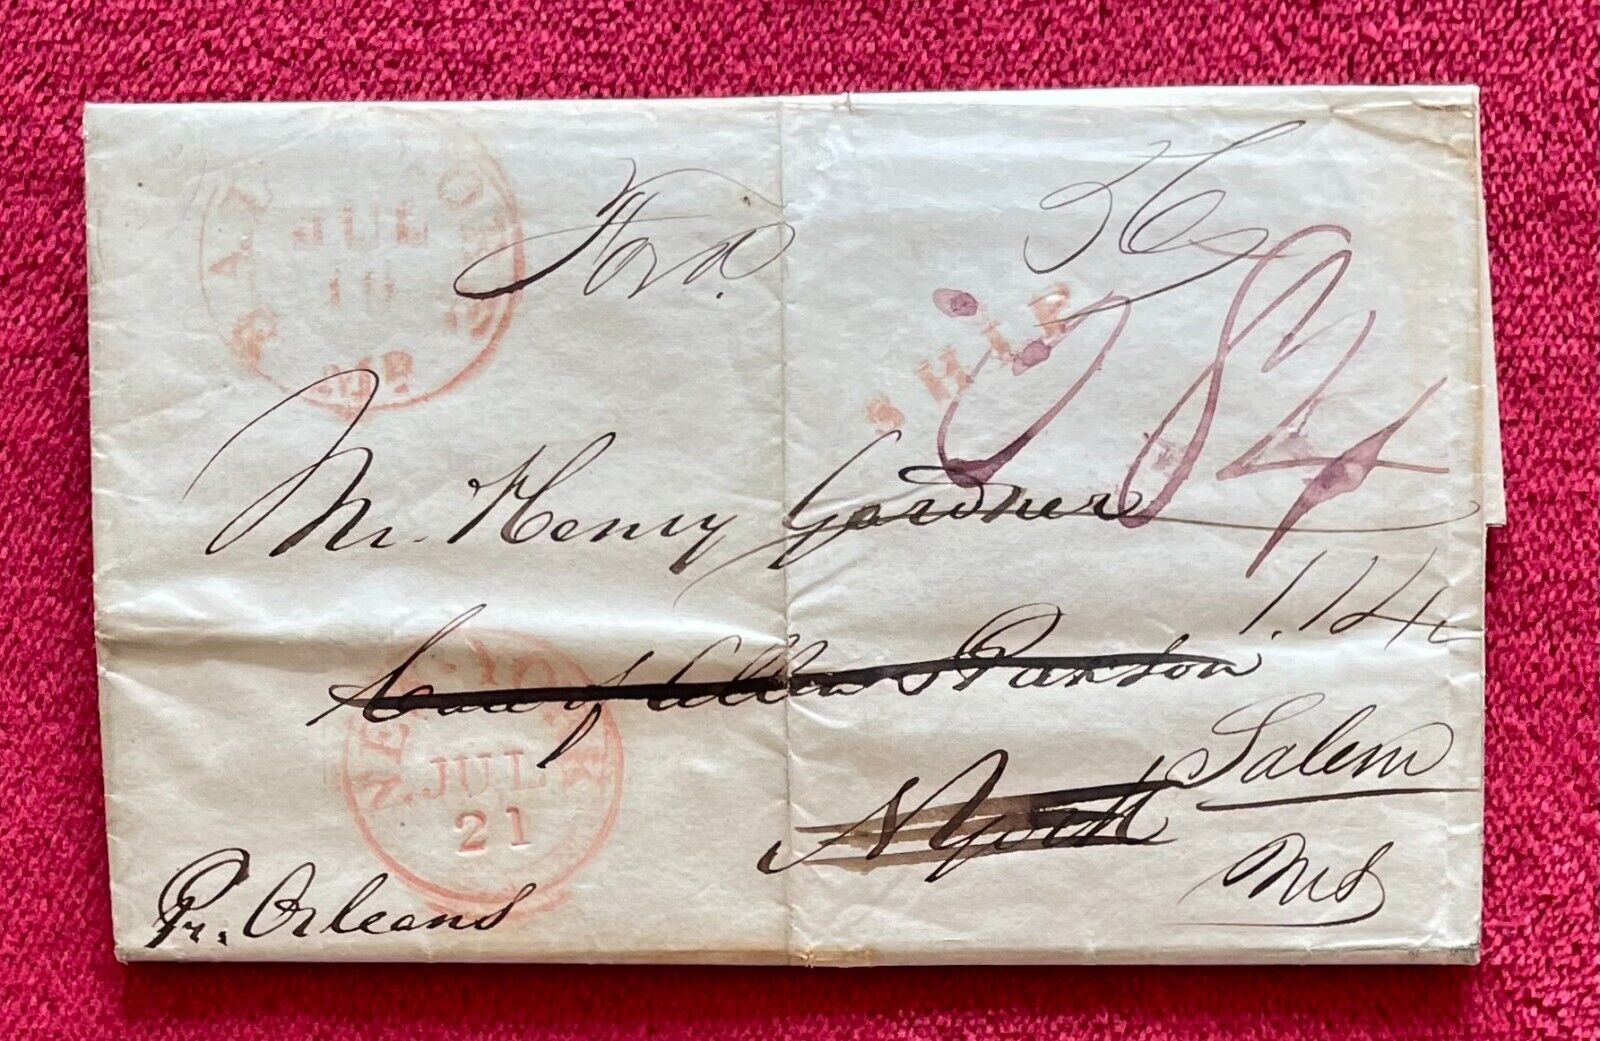 WHALE OIL & SPERM CANDLES EXPORTS by GARDNER FAMILY, SALEM, MASS. - 1841 LETTER